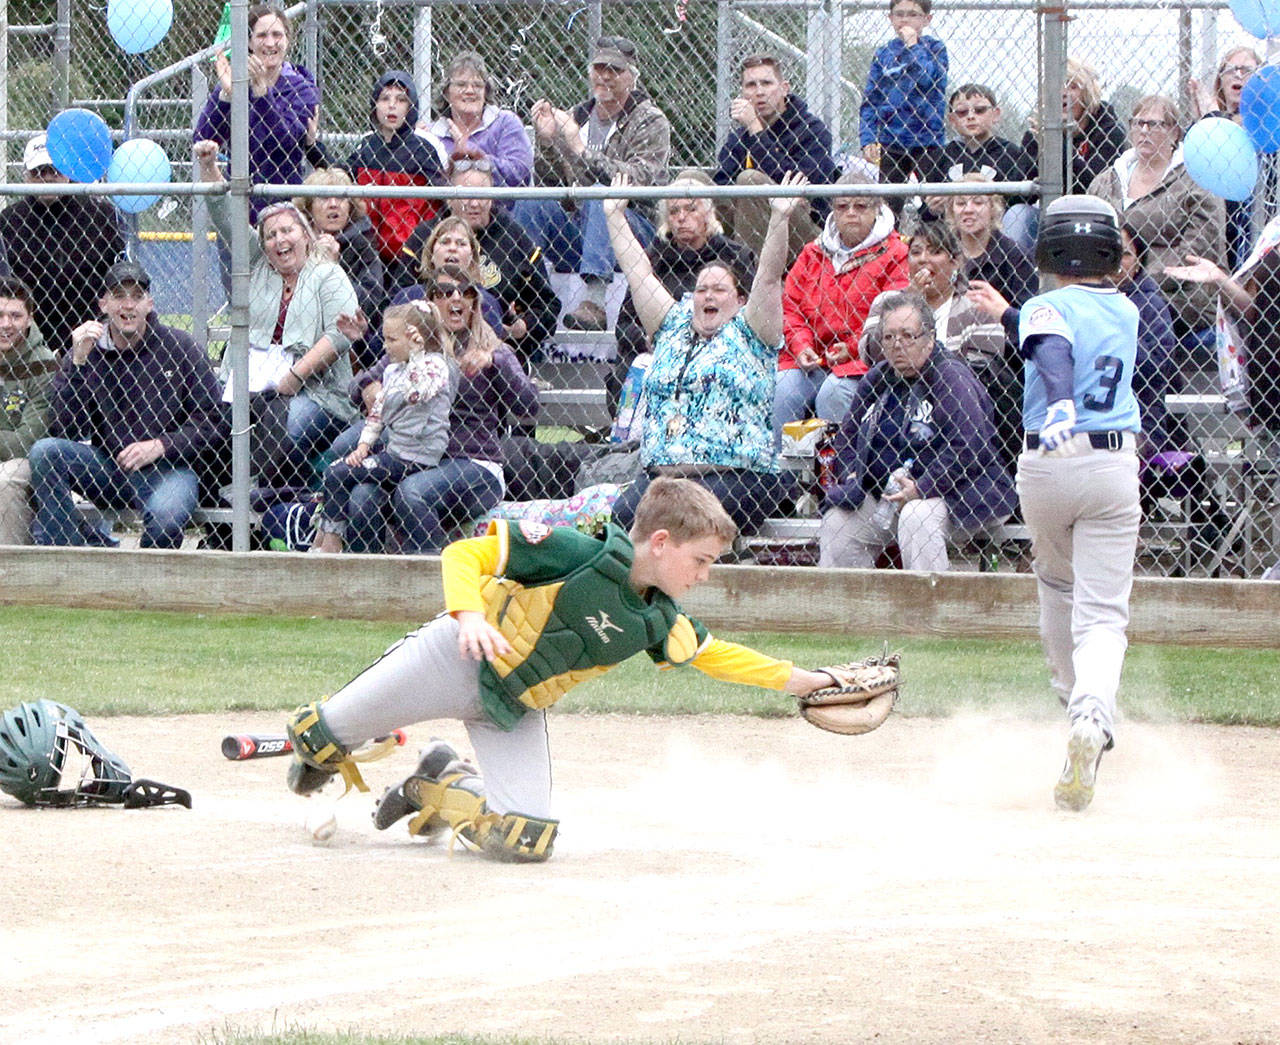 Bryton Amsdill of Swains scored past Laurel Lanes catcher Nathan Basden in the Cal Ripken U12 championship game Thursday. Laurel Lanes rode a big eight-run fifth inning behind a grand slam from Ezra Townsend to win 12-7. (Dave Logan/for Peninsula Daily News)